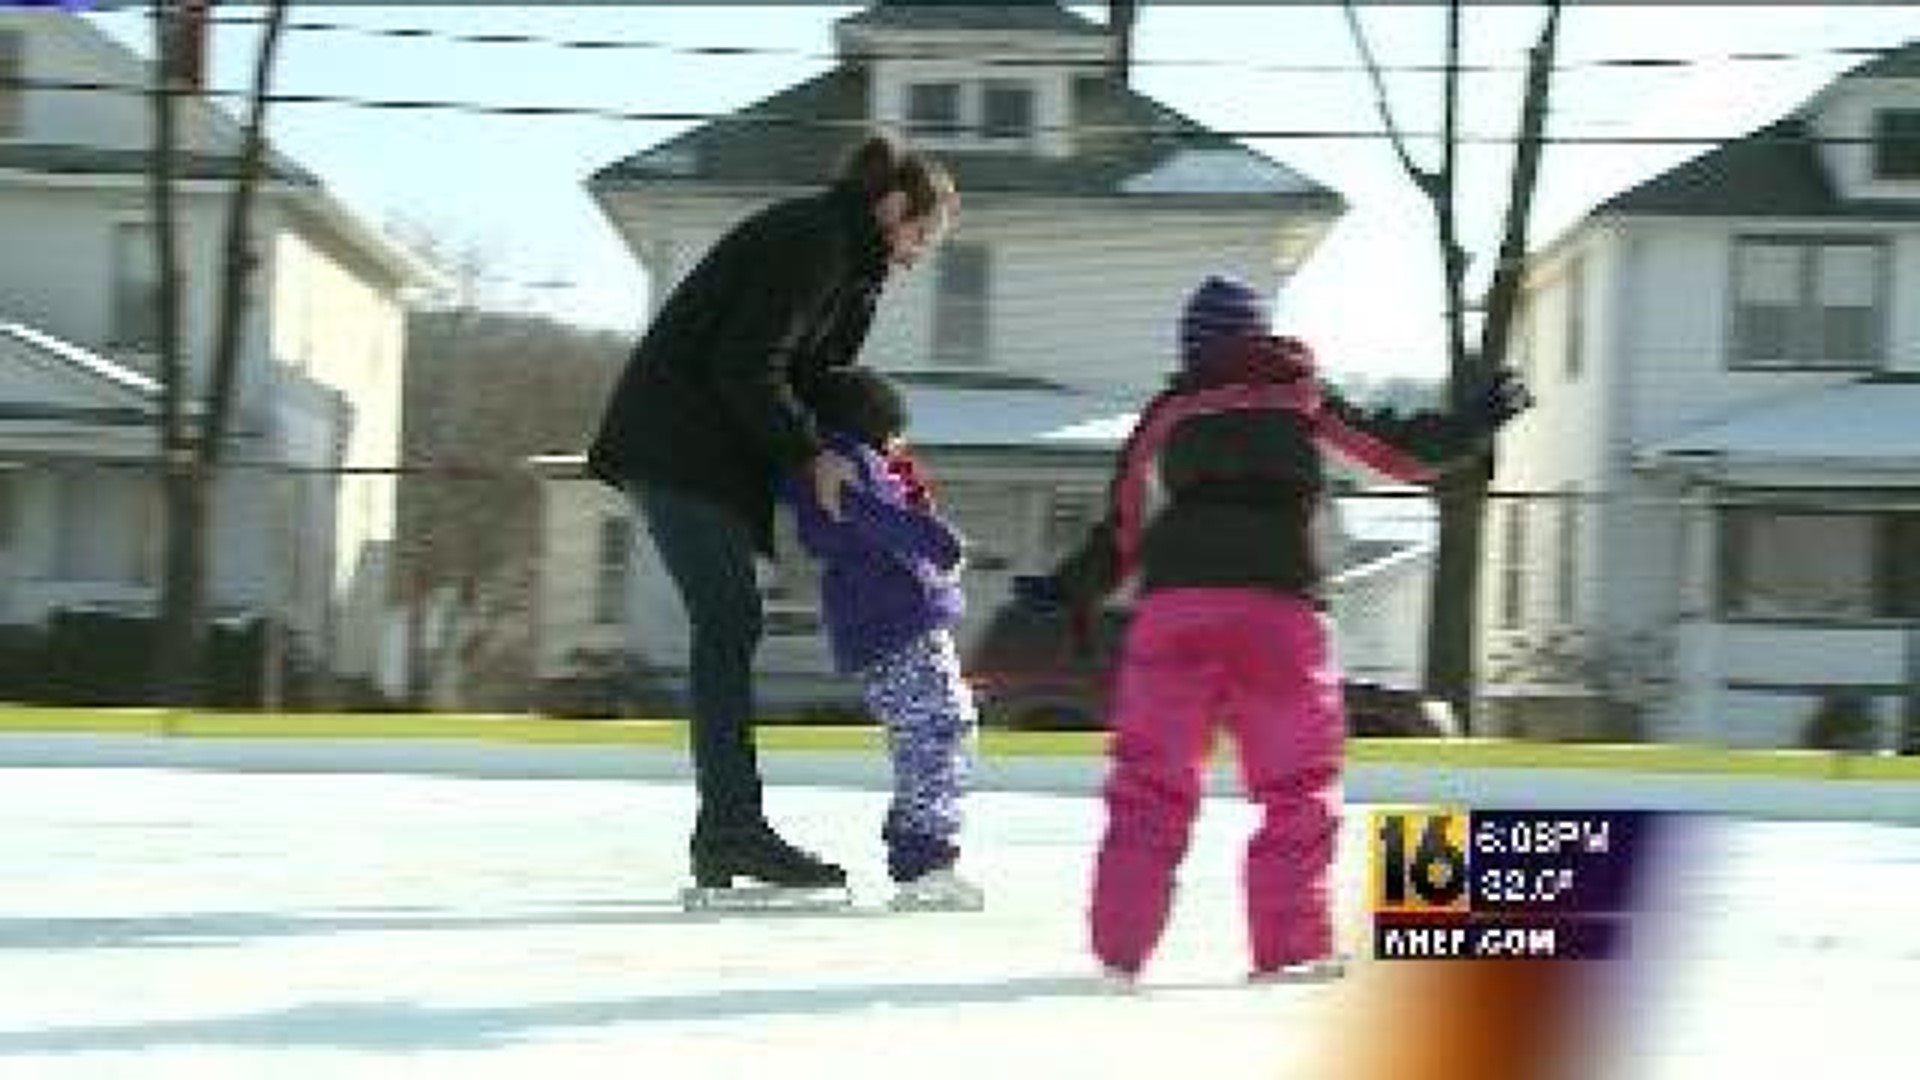 Folks Flock to Ice Rink for Opening